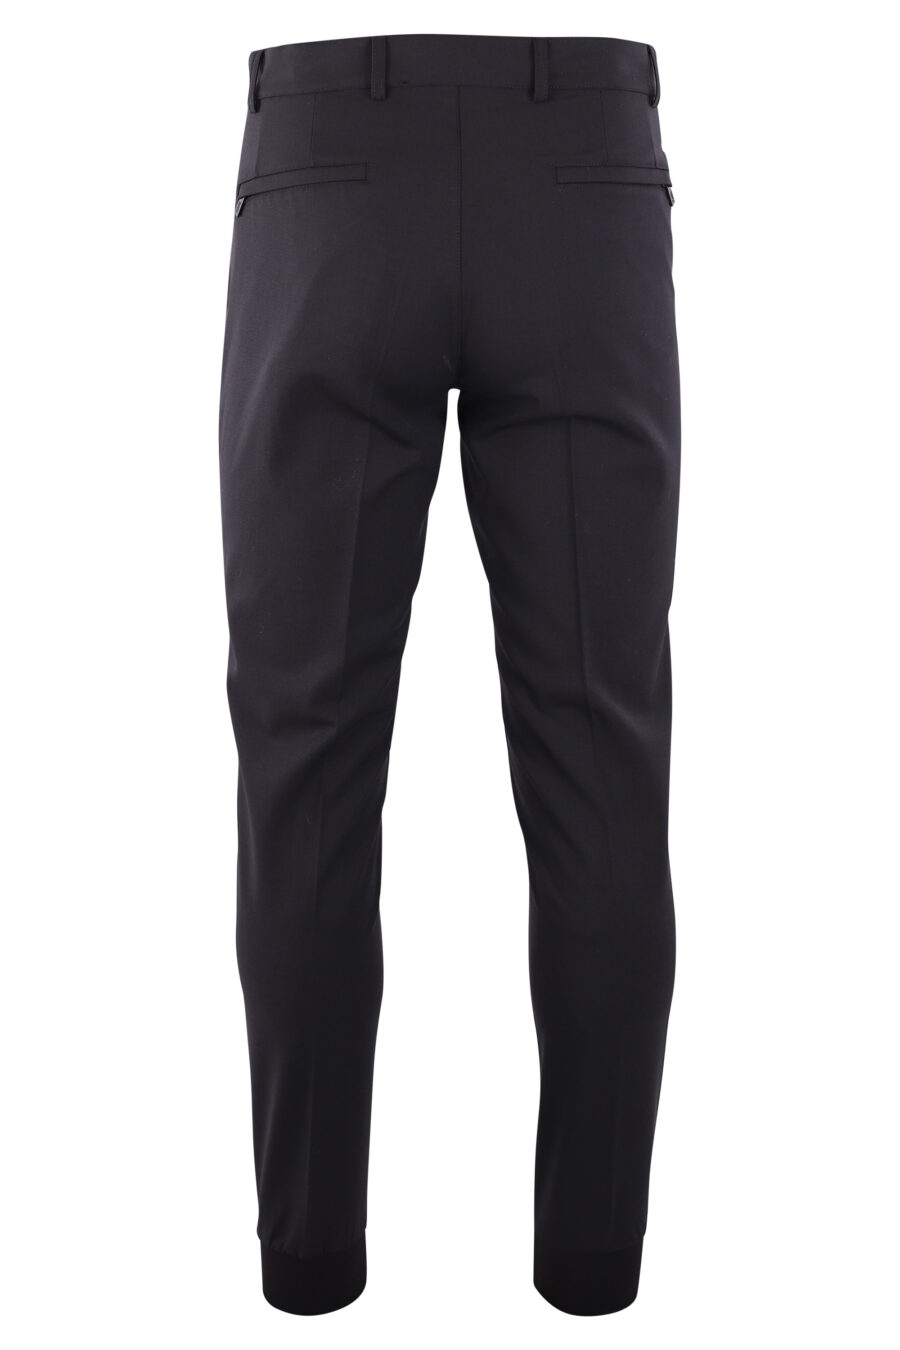 Black trousers with logo on zip - IMG 3234